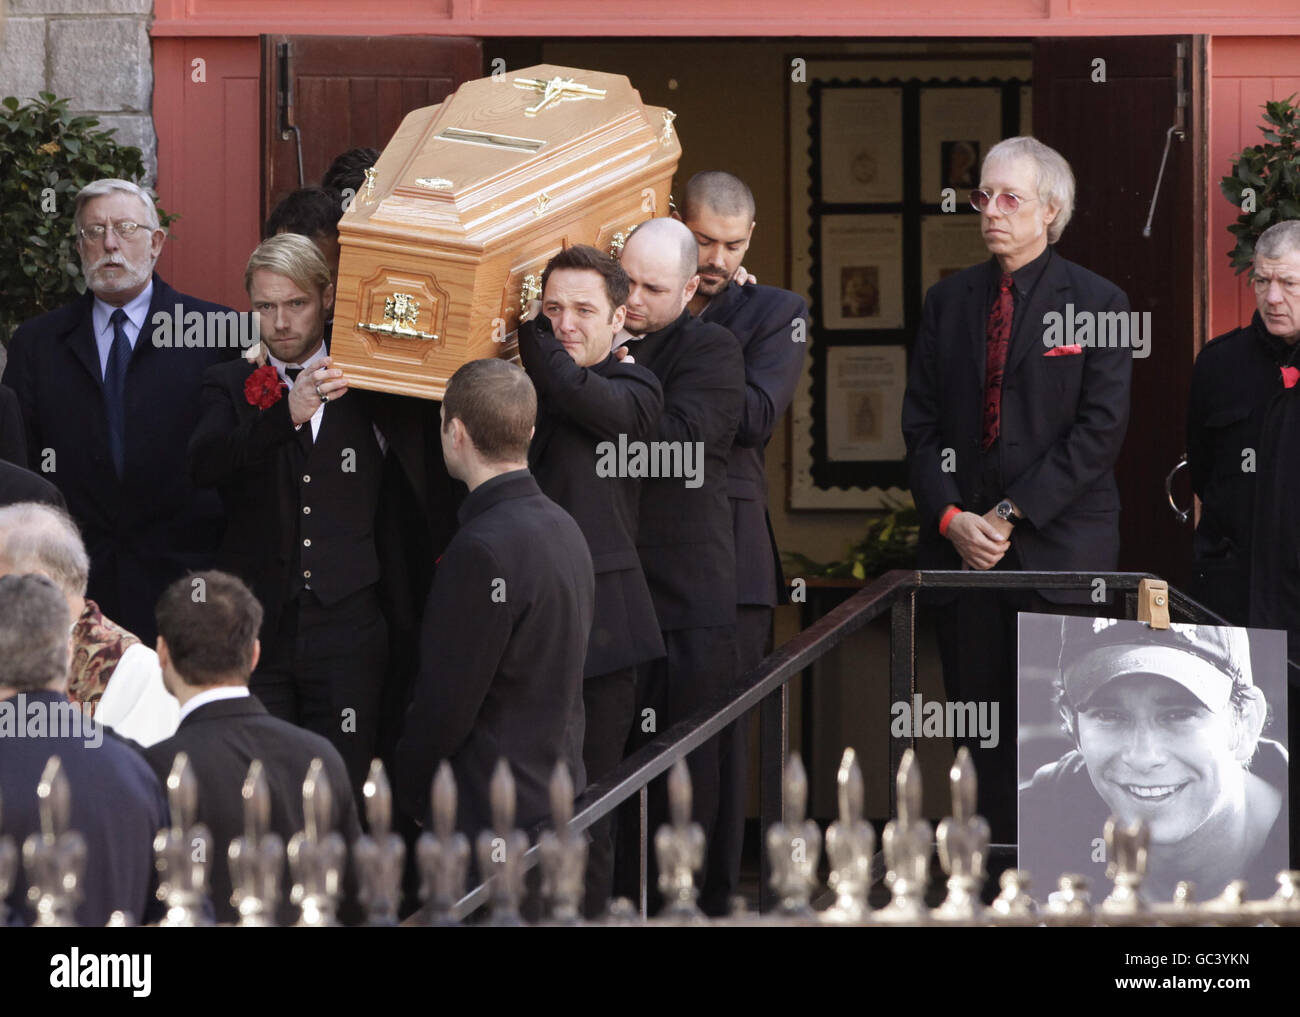 The coffin is carried out after the funeral of Stephen Gately by members of Boyzone, including Ronan Keating (front left), Mikey Graham (front right), Shane Lynch (rear right) St Laurence O'Toole Church in Dublin. Stock Photo